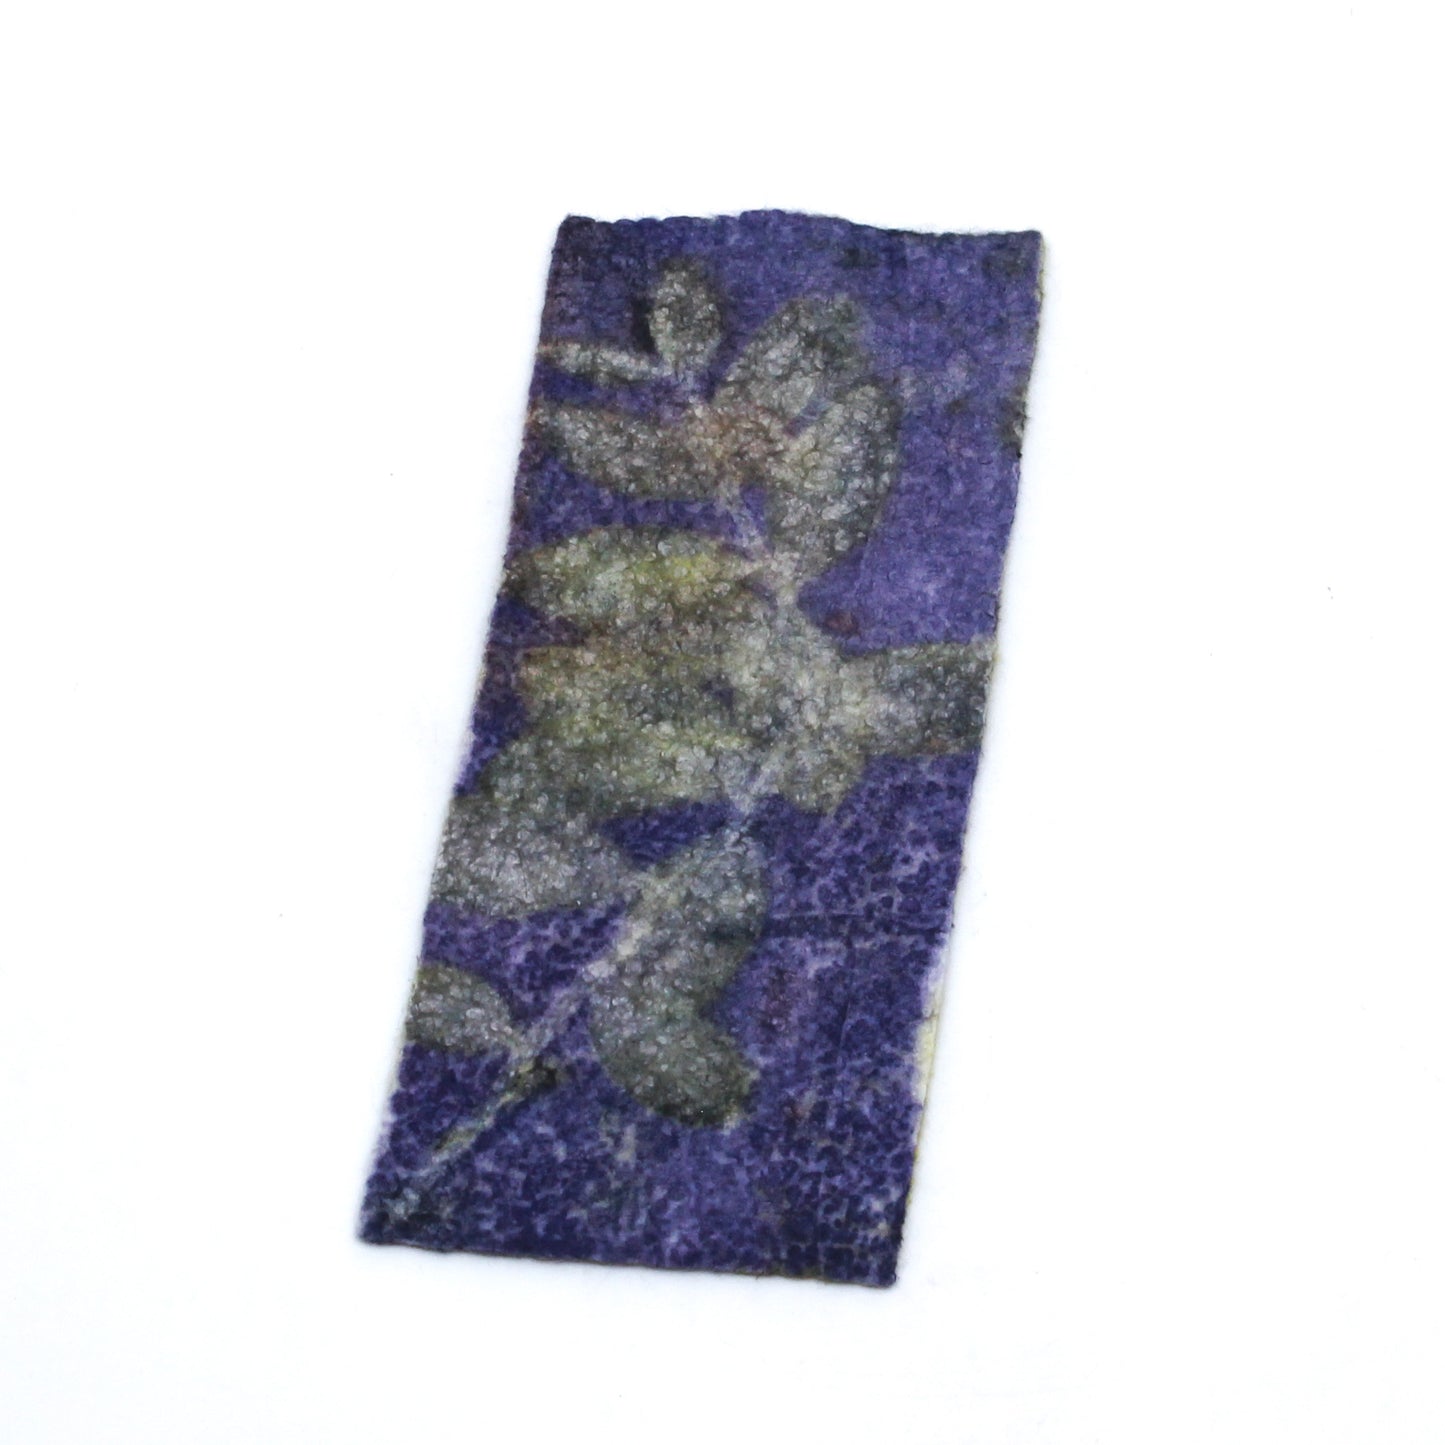 Plant Prints Bookmarks in Purple